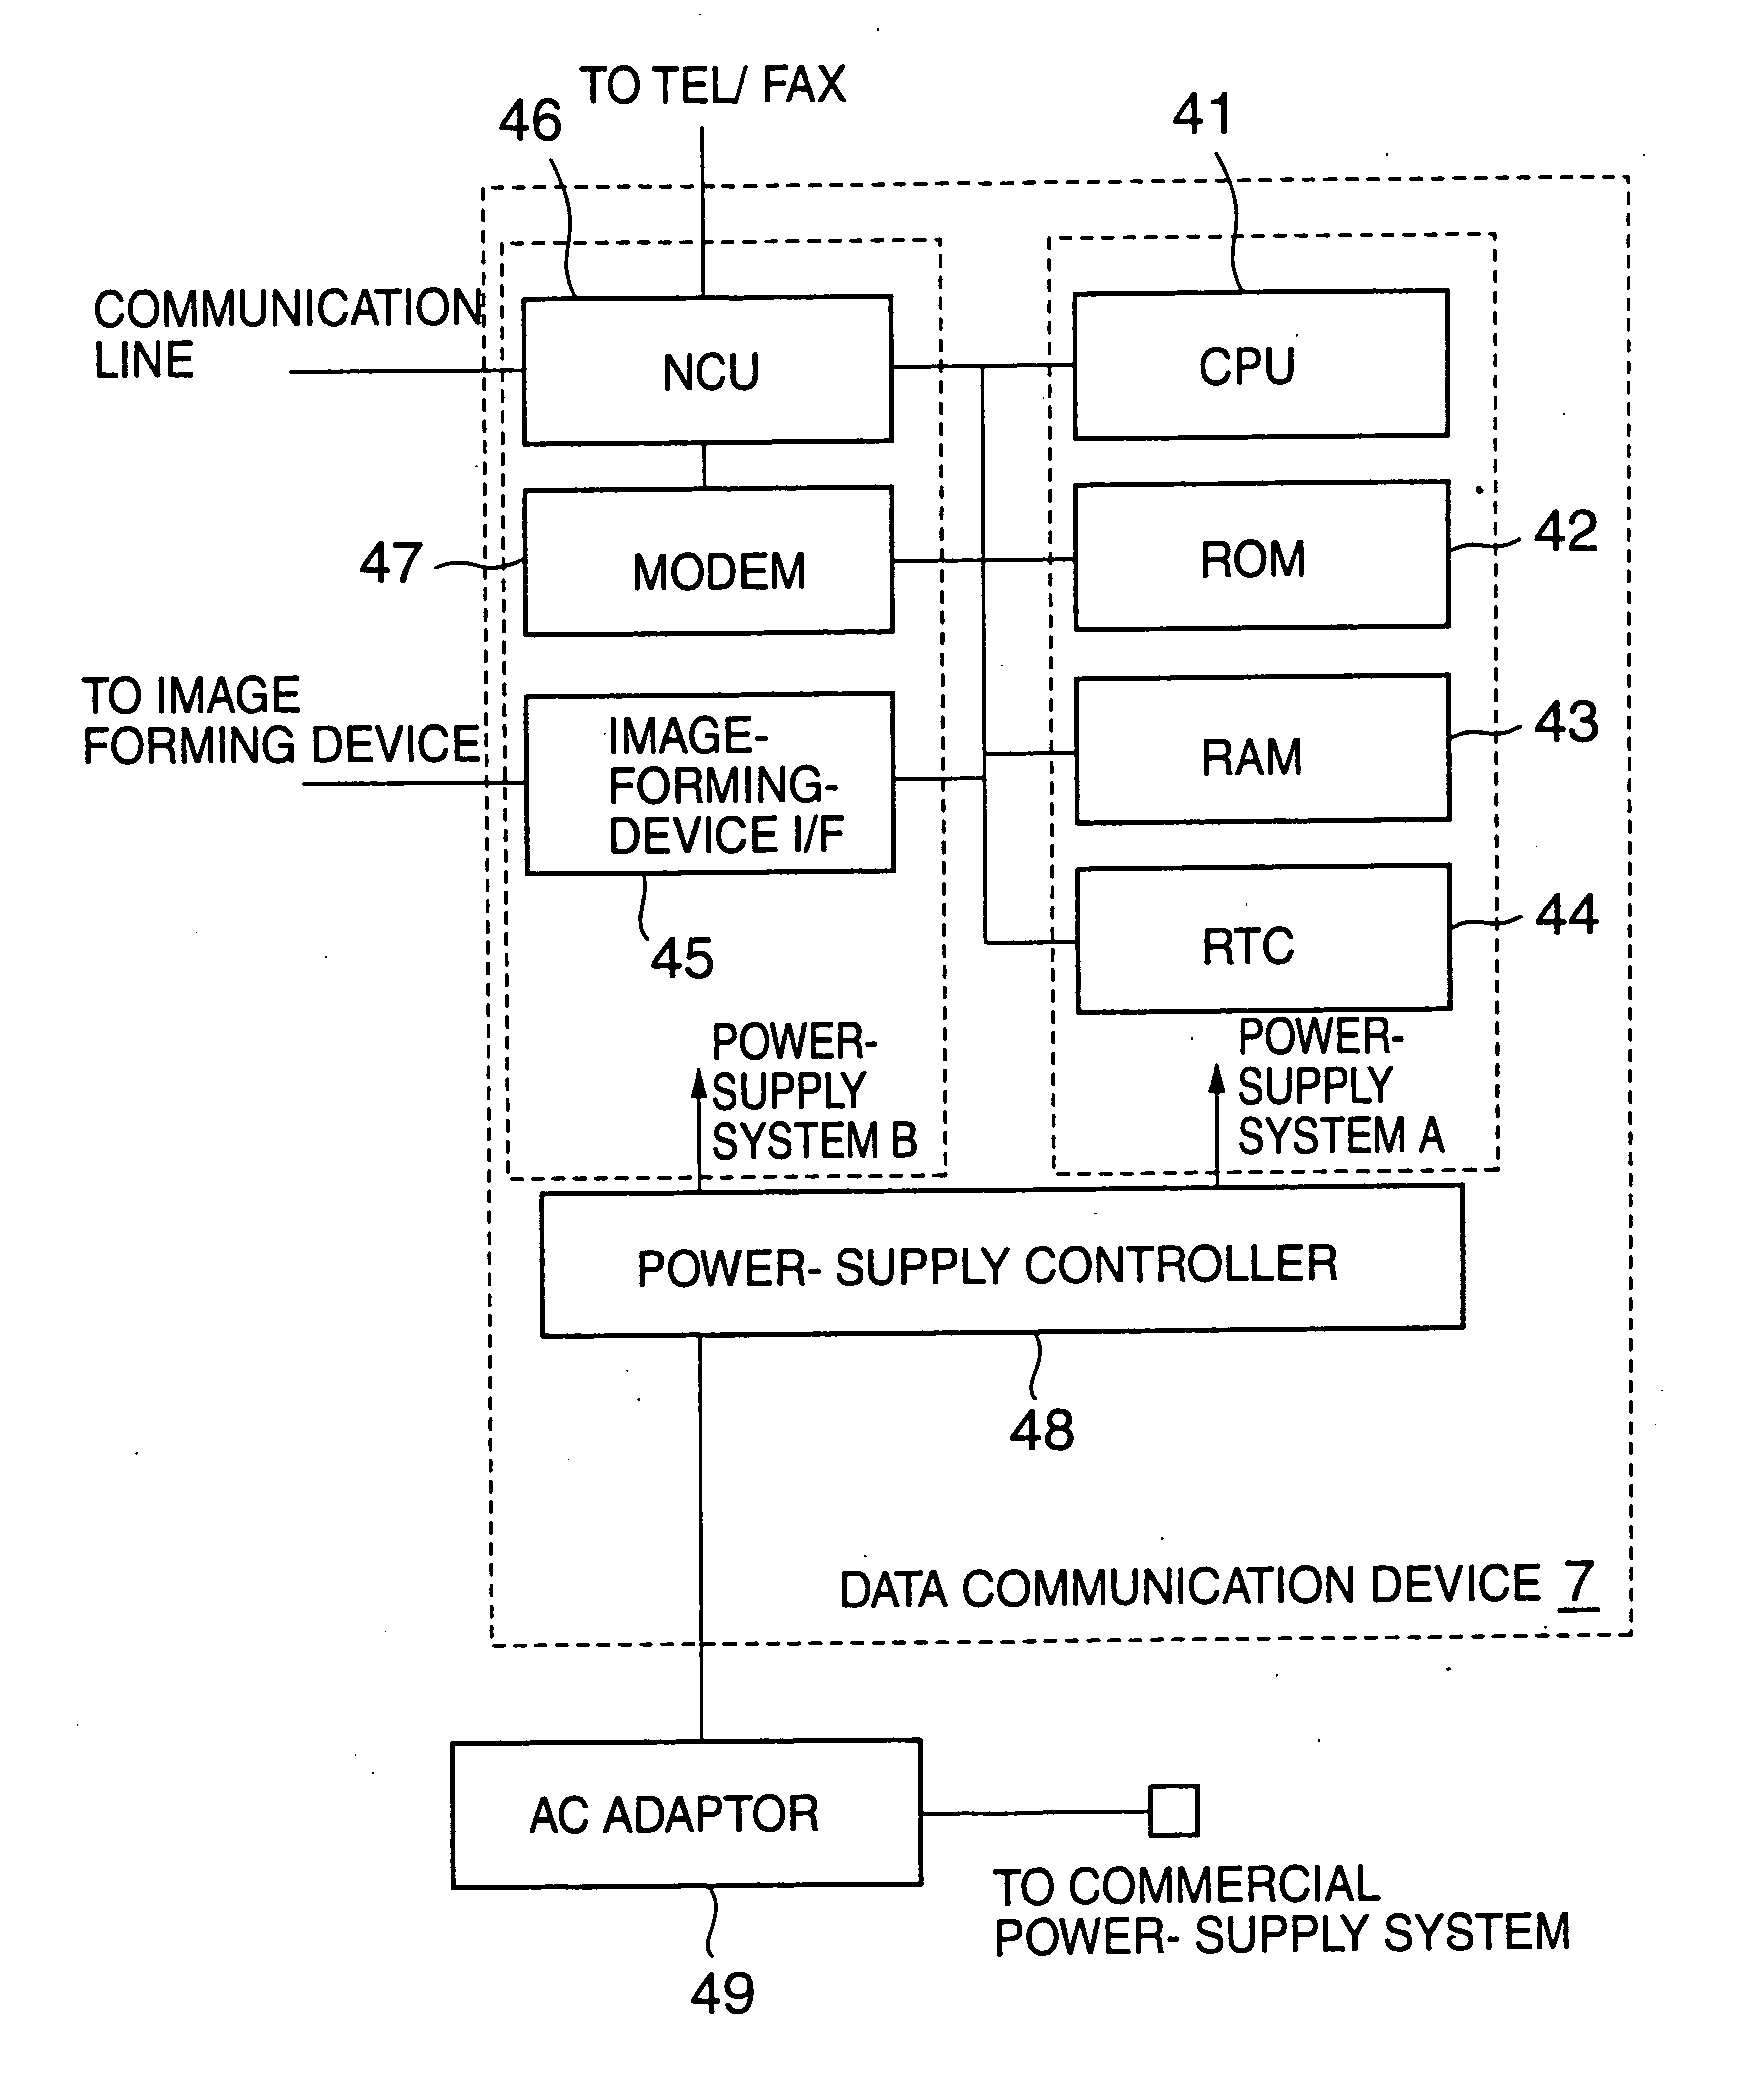 Image-forming-device management system capable of operating in energy-saving mode